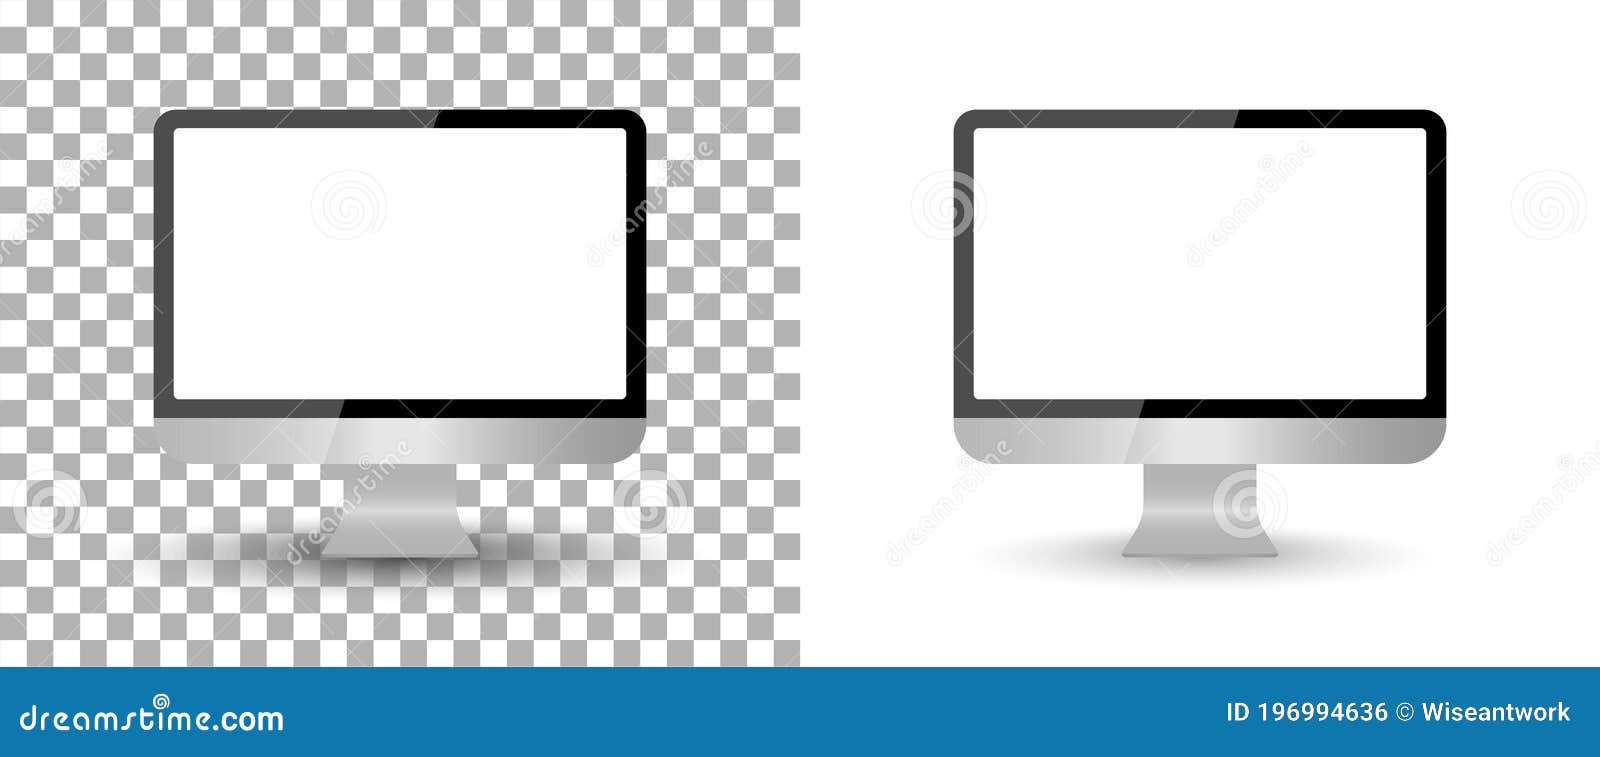 Computer Monitor Mockup with Screen Blank. PC Isolated Desktop. Laptop with  Frame. Modern Icon on Transparent Background Stock Vector - Illustration of  mock, border: 196994636